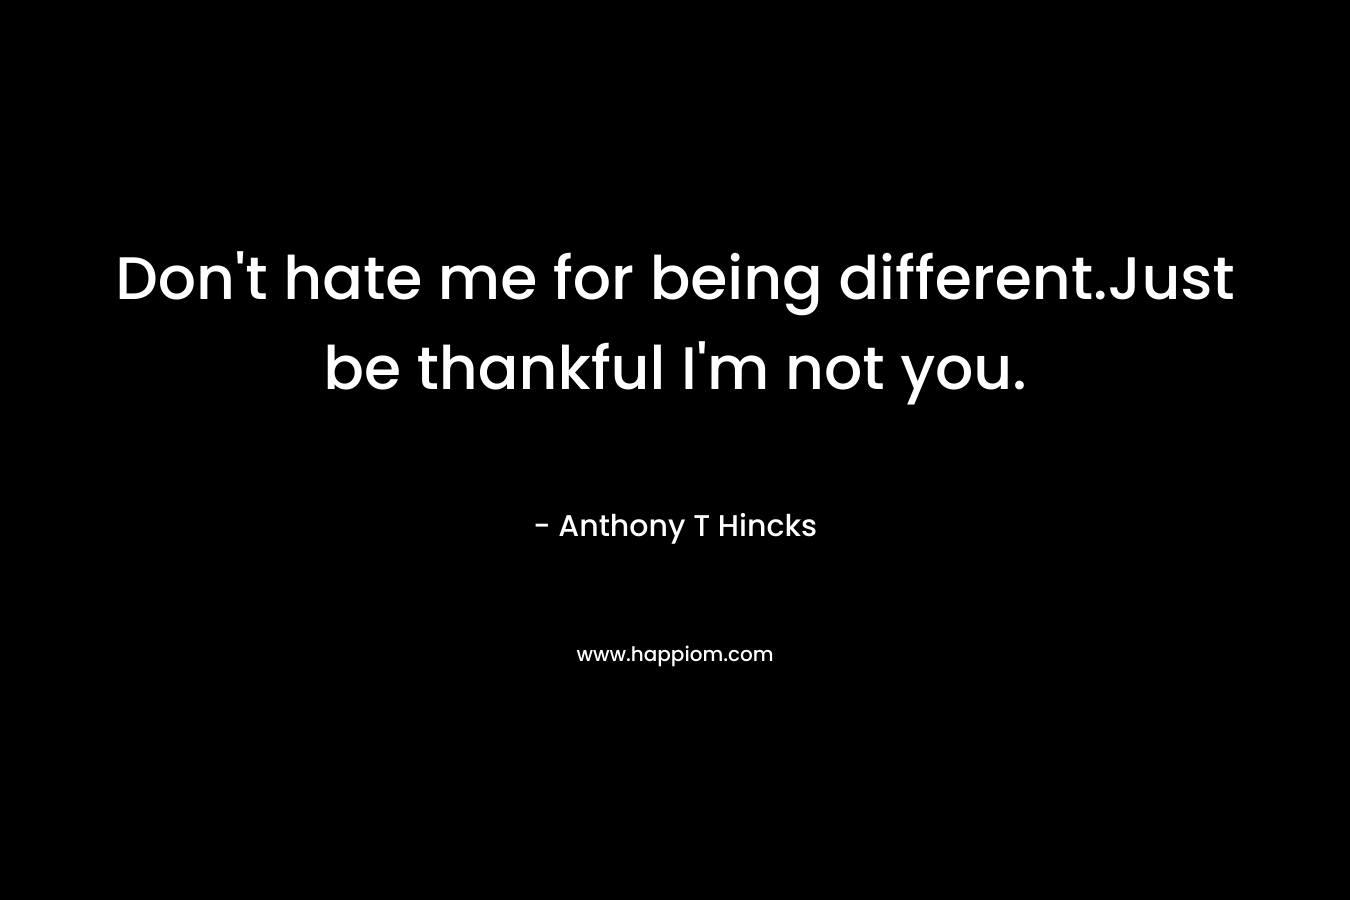 Don’t hate me for being different.Just be thankful I’m not you. – Anthony T Hincks